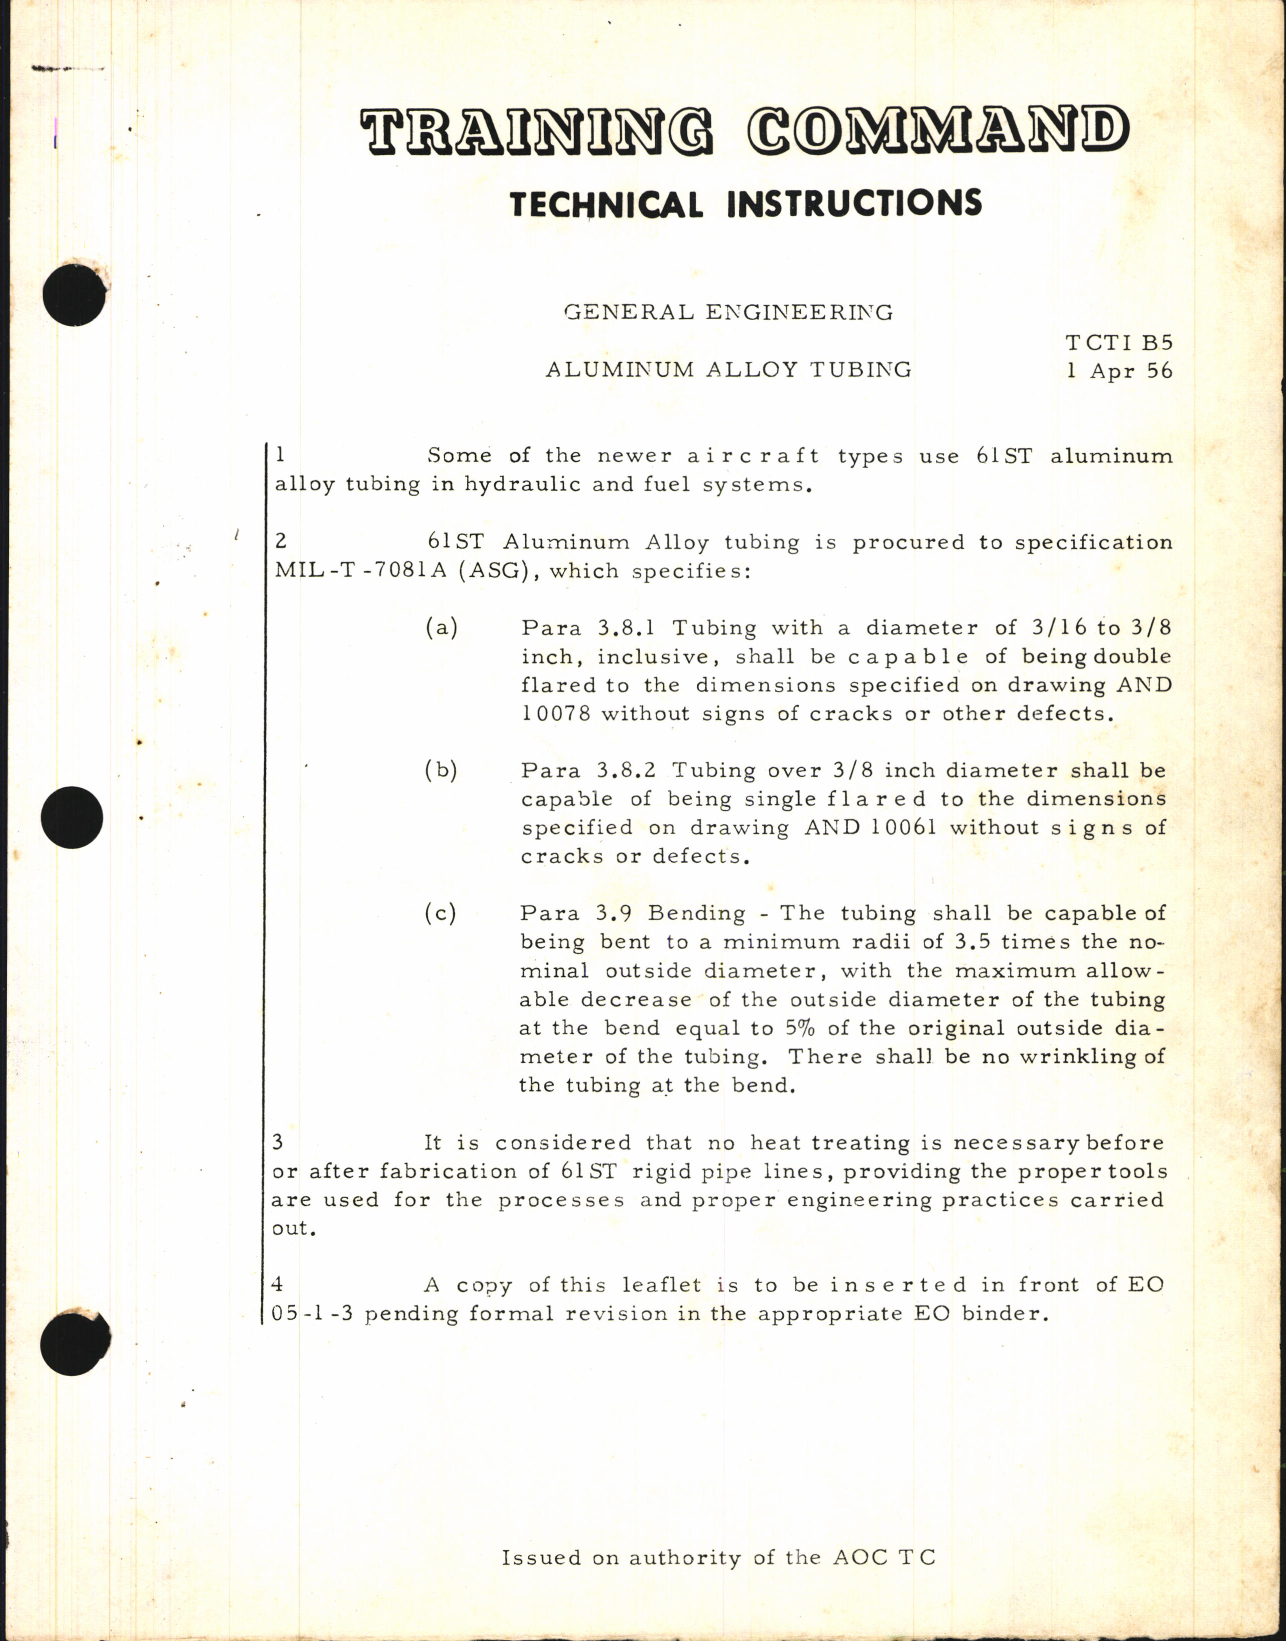 Sample page 1 from AirCorps Library document: Training Command Technical Instructions for Aluminum Alloy Tubing